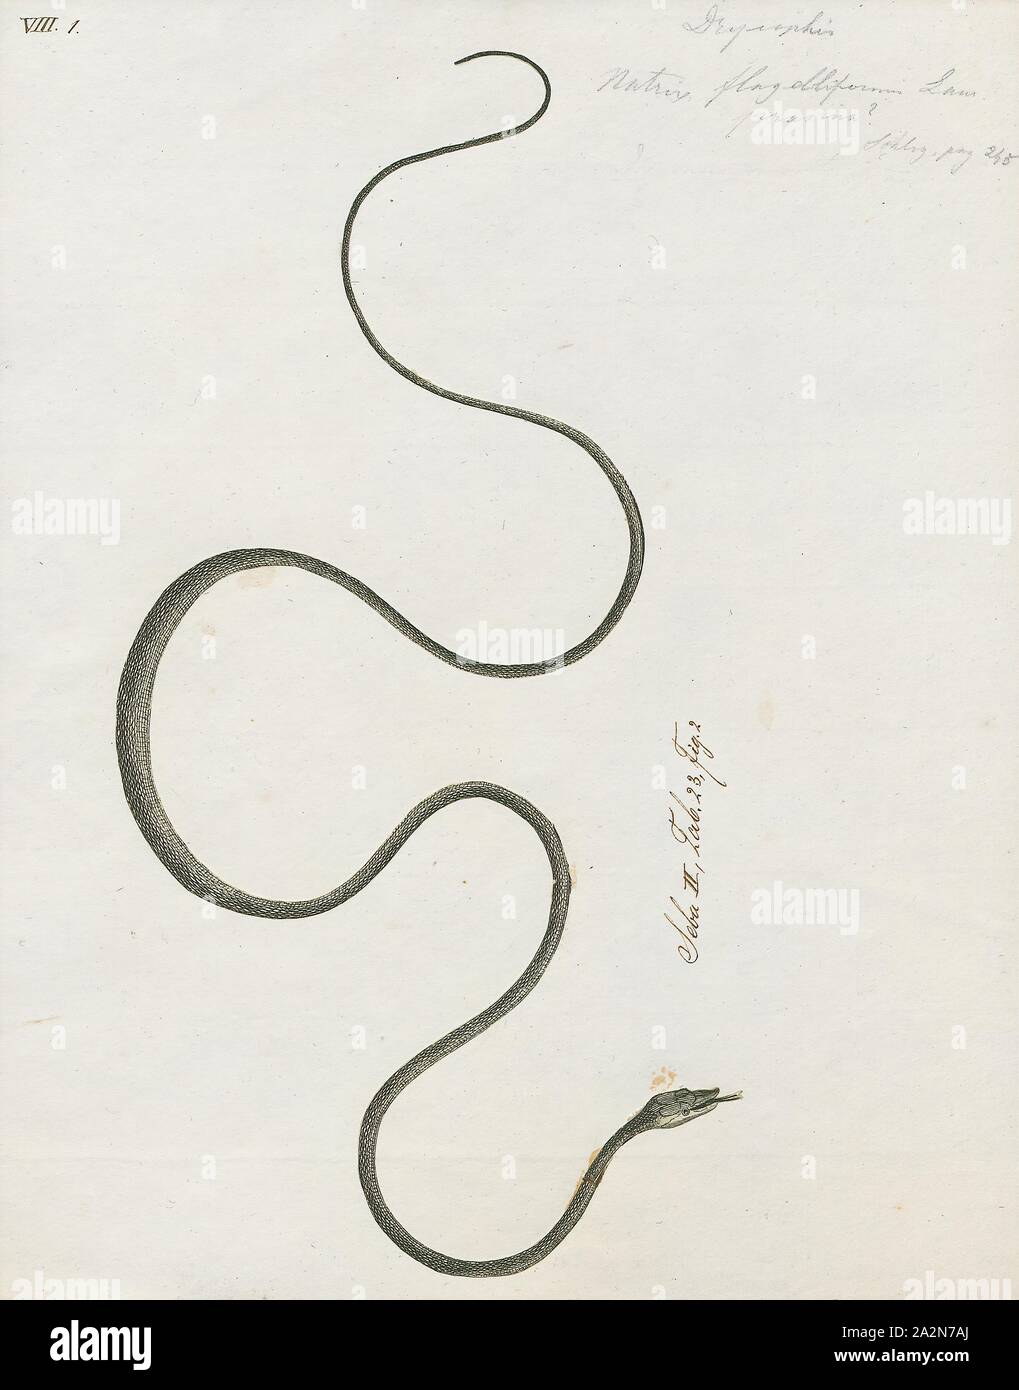 Natrix flagelliformis, Print, Natrix is a genus of Old World snakes in the subfamily Natricinae of the family Colubridae., 1734-1765 Stock Photo